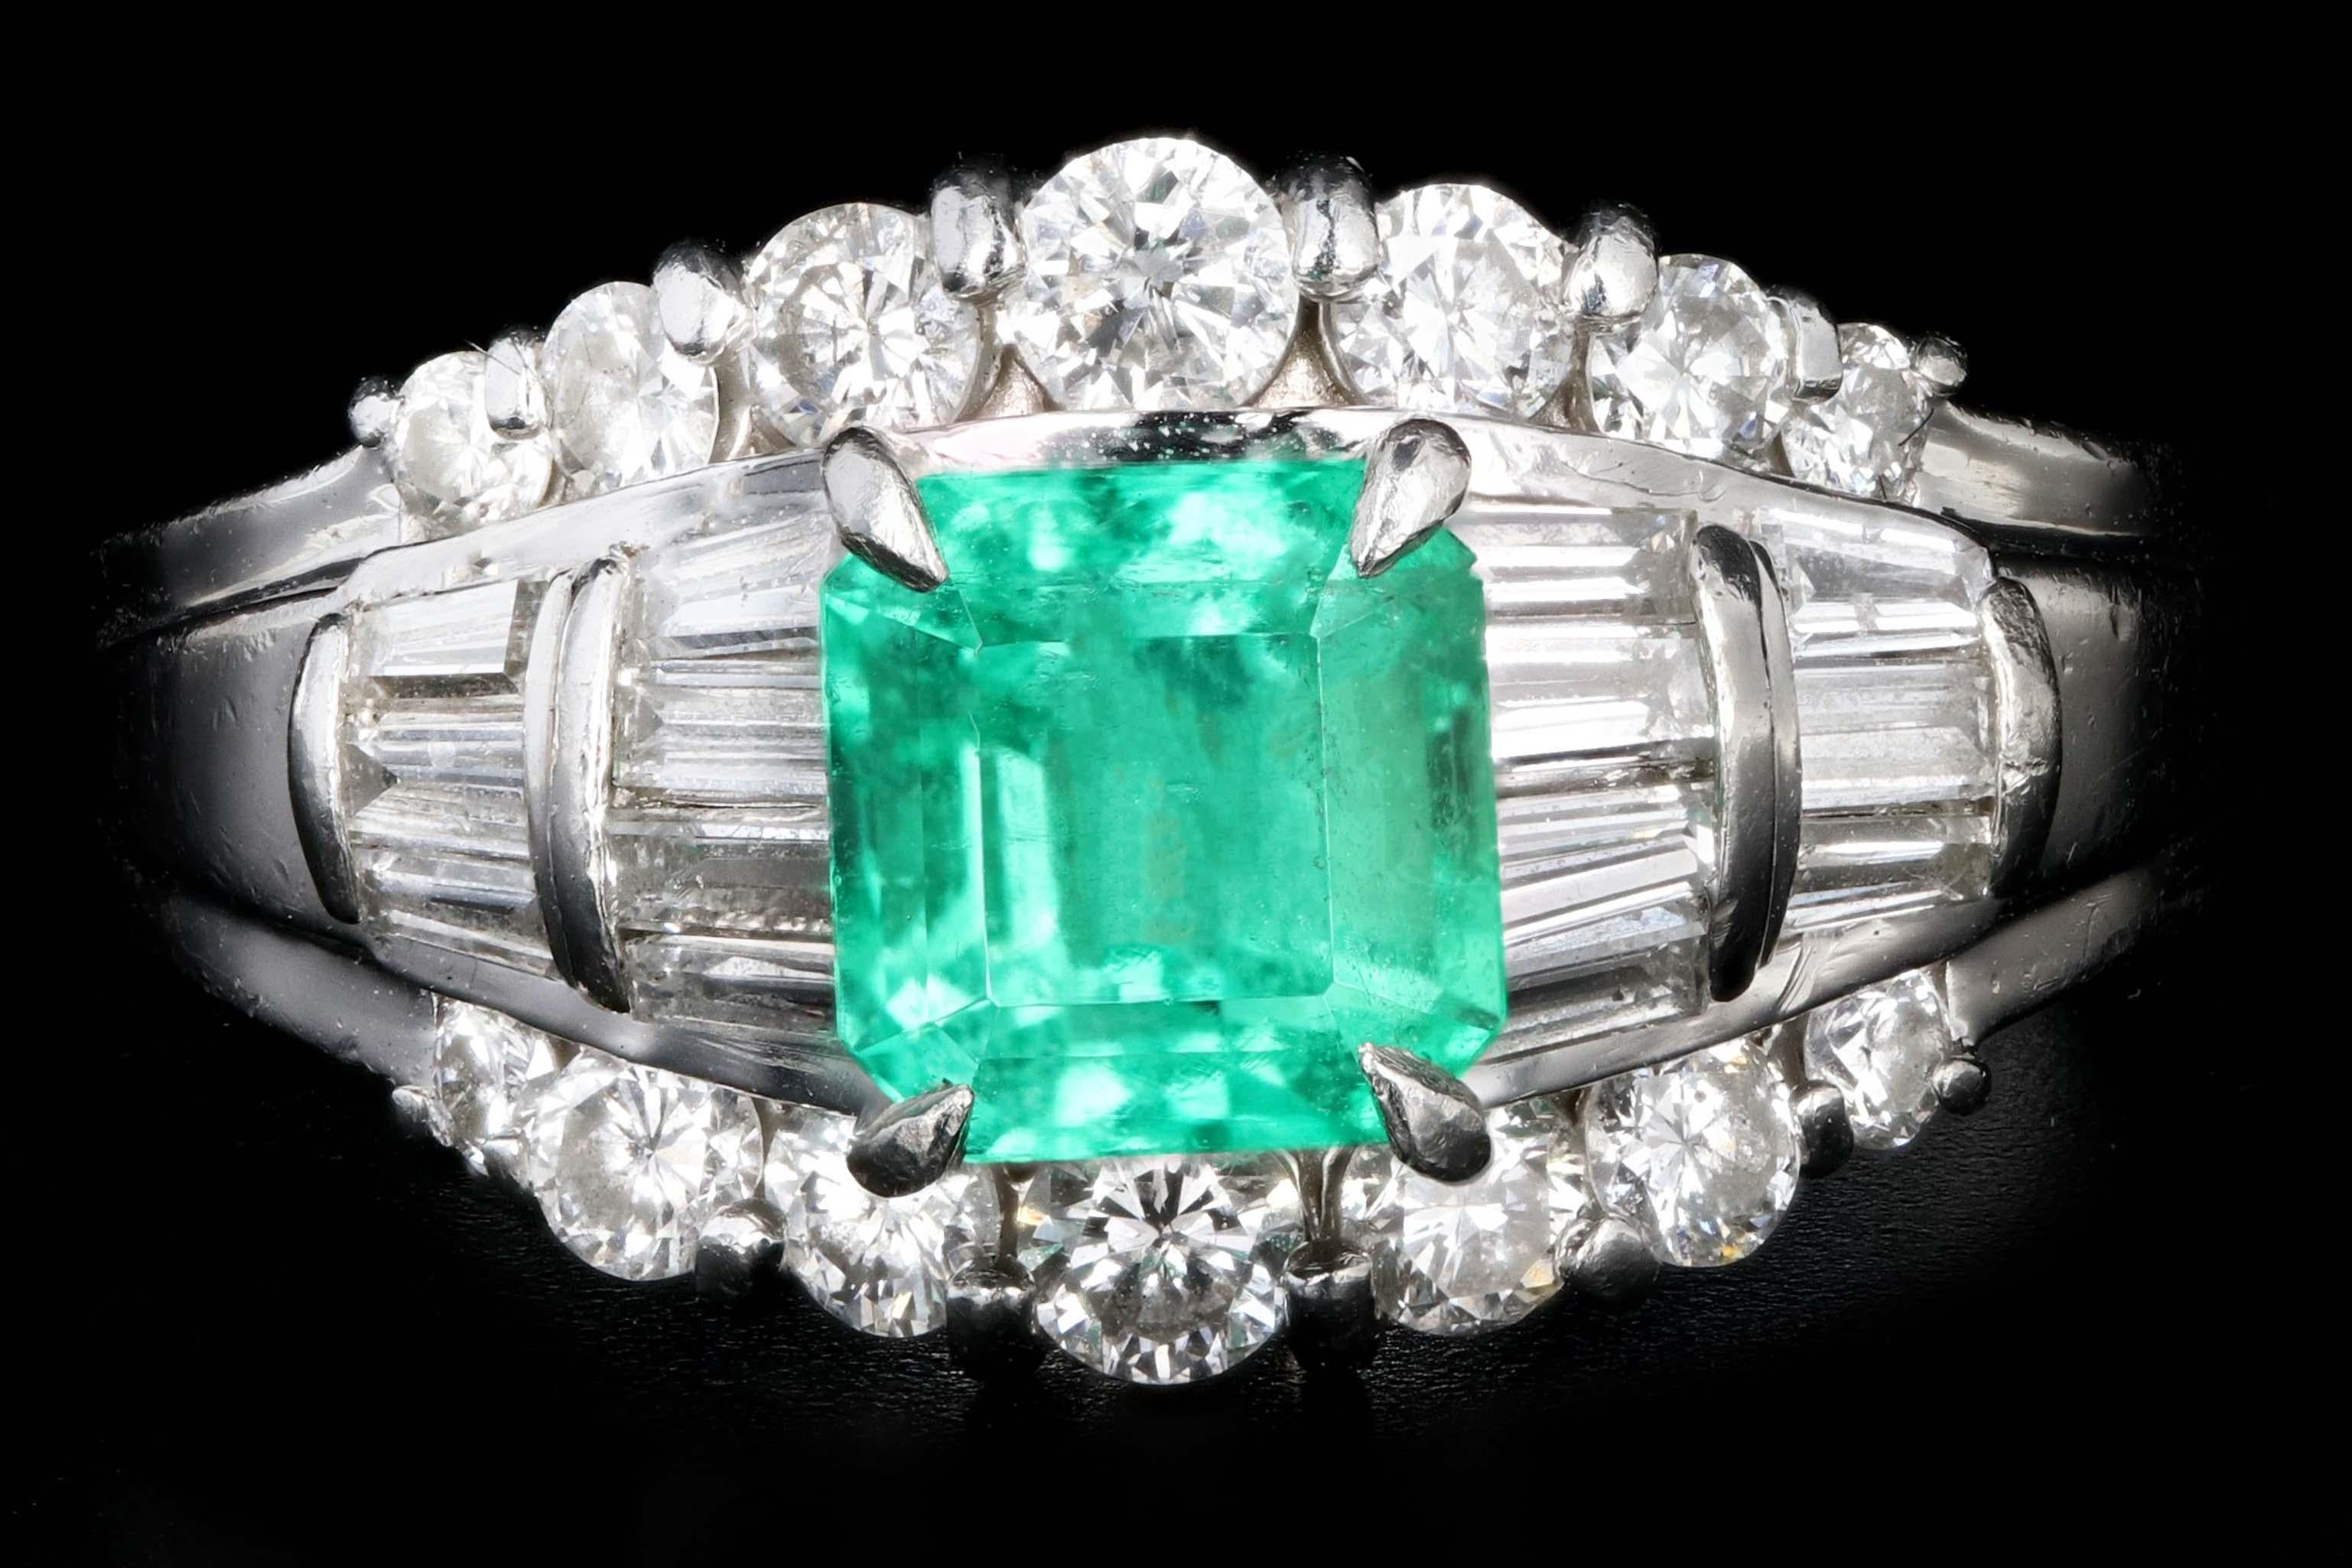 Era: Retro

Composition: Platinum

Primary Stone: Emerald

Carat Weight: .88 Carats

Accent Stone: Round Brilliant Cut & Baguette Cut Diamonds

Carat Weight: .85 Carats

Color: G-H

Clarity: Vs1/2

Total Carat Weight: 1.73 Carats

Ring Weight: 4.5